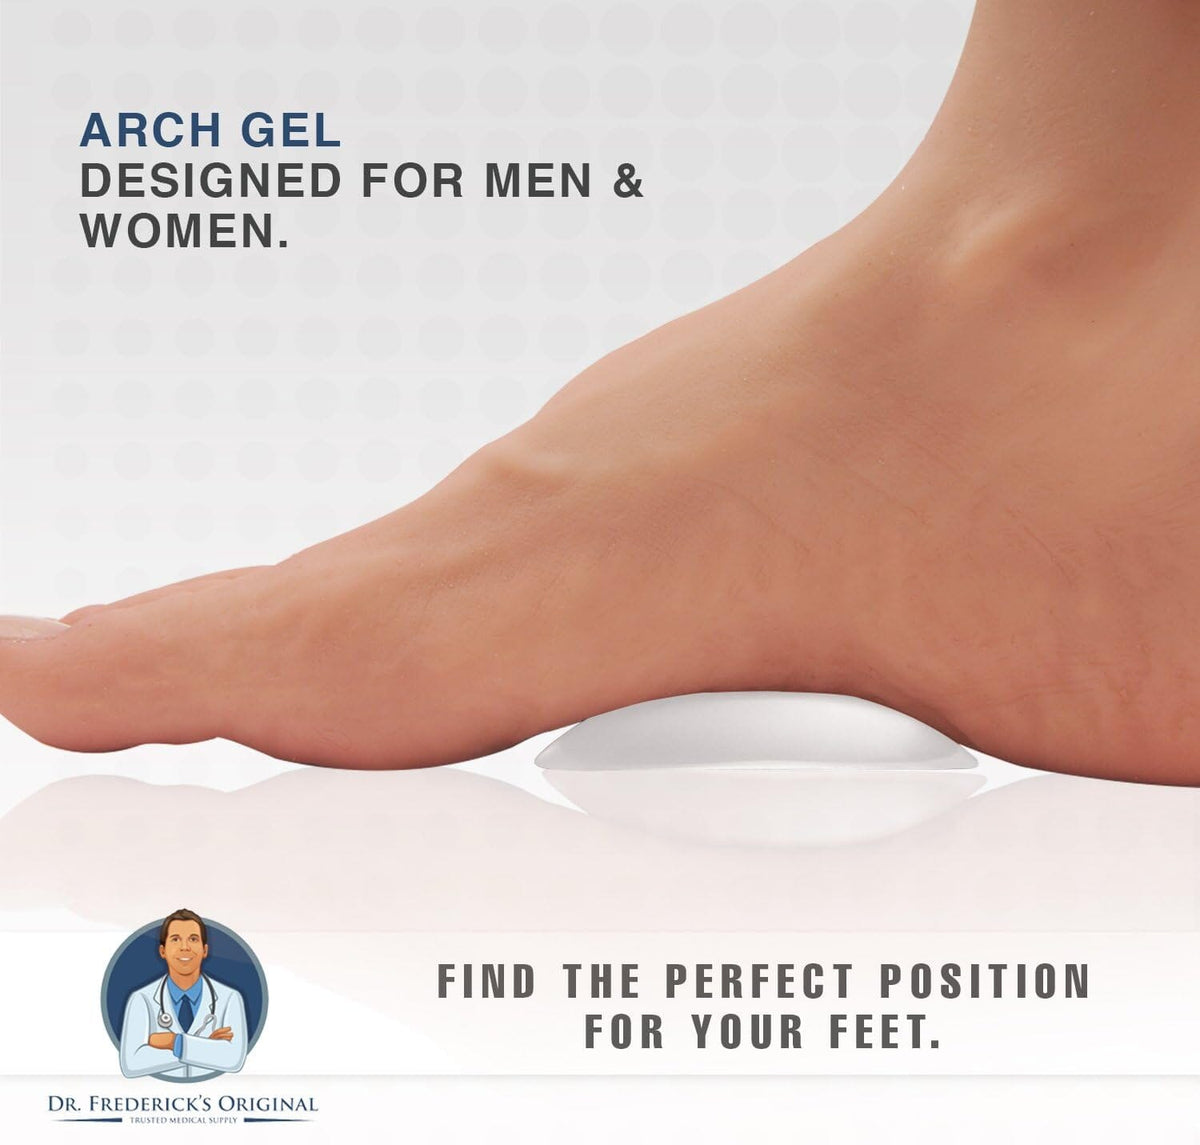 Dr. Frederick&#39;s Original Peel &amp; Stick Foot Arch Support Gel Pads - 6 Pieces - High Arch Cushions - Relieves Pain from PES Cavus Foot Pain Dr. Frederick&#39;s Original 